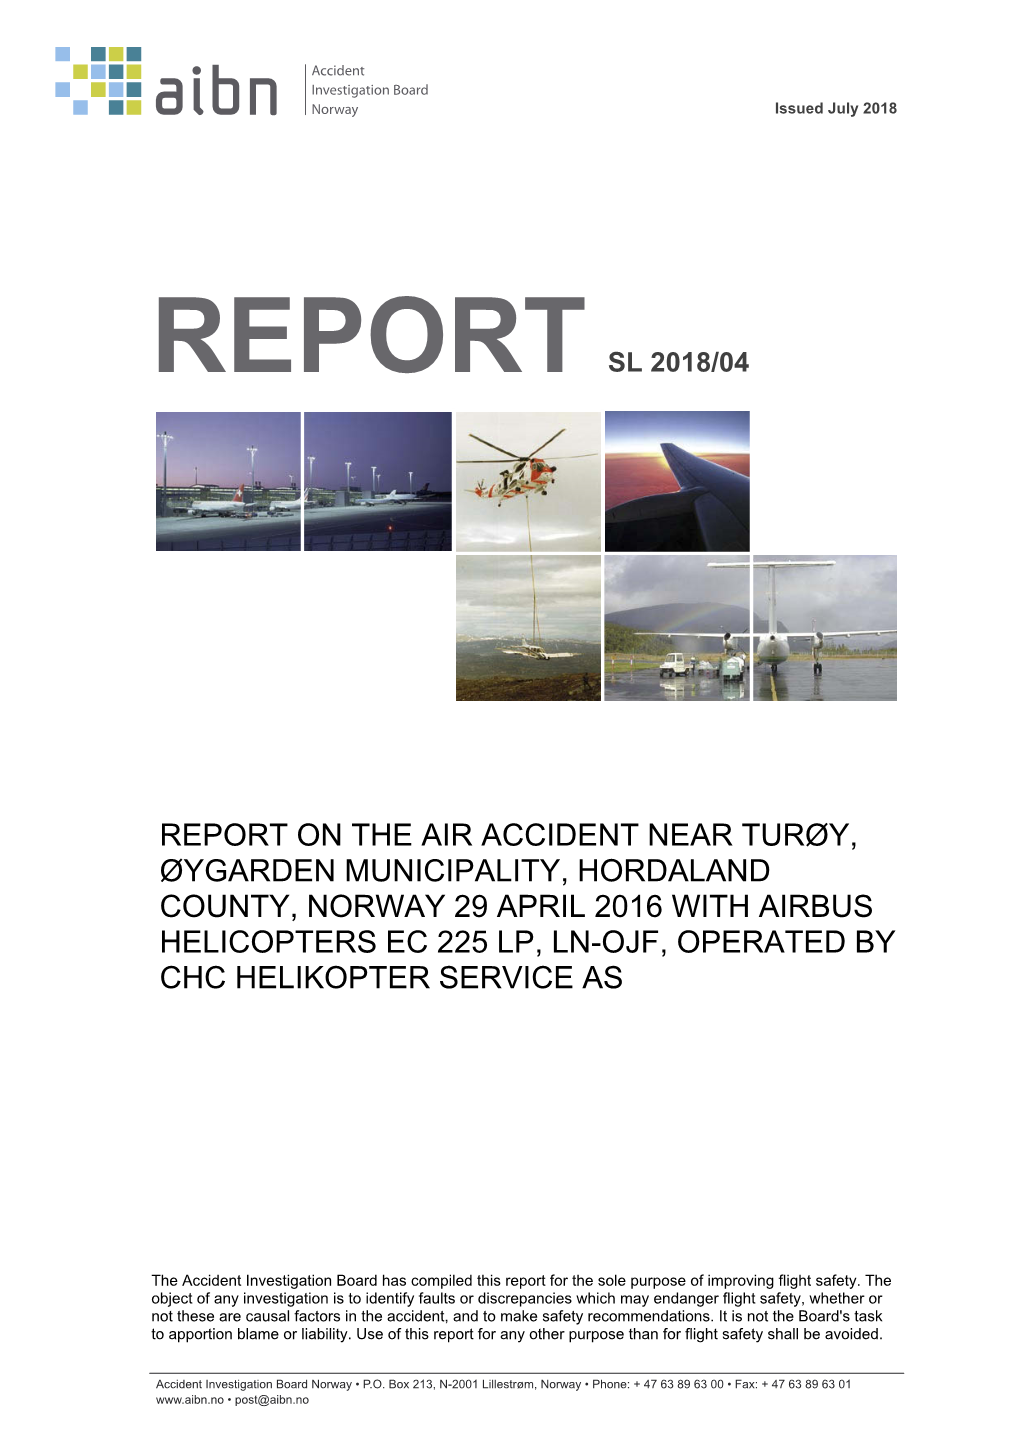 Report on the Air Accident Near Turøy 29 April 2016 with Airbus